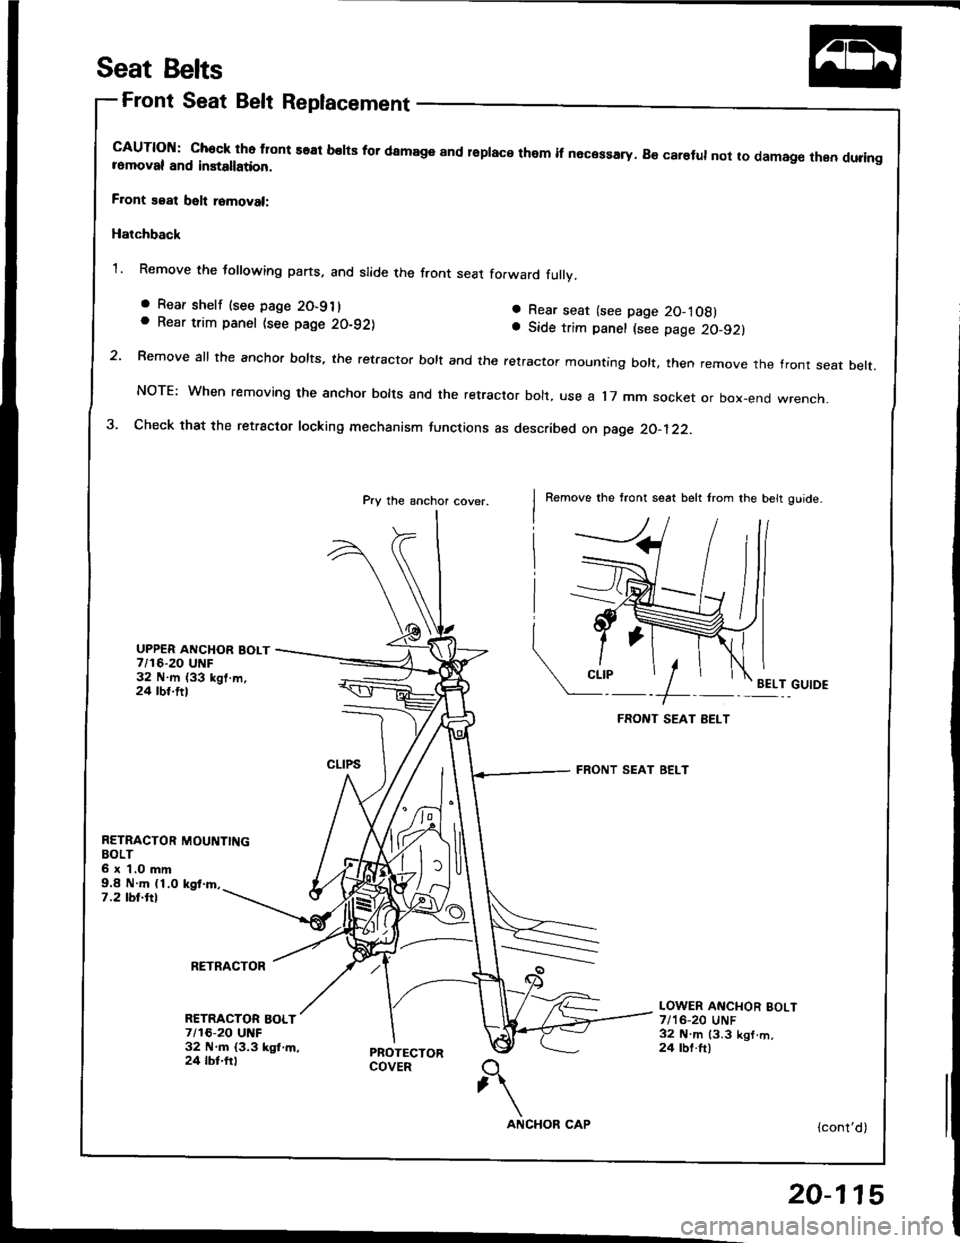 HONDA INTEGRA 1994 4.G Workshop Manual Seat Belts
Front Seat Belt Replacement
cAUTloN: chock tho tlont seal belts for damage and lsplace them if necessary. B€ carelul not to damag€ then duringromoval and installation.
F.ont seat belt r